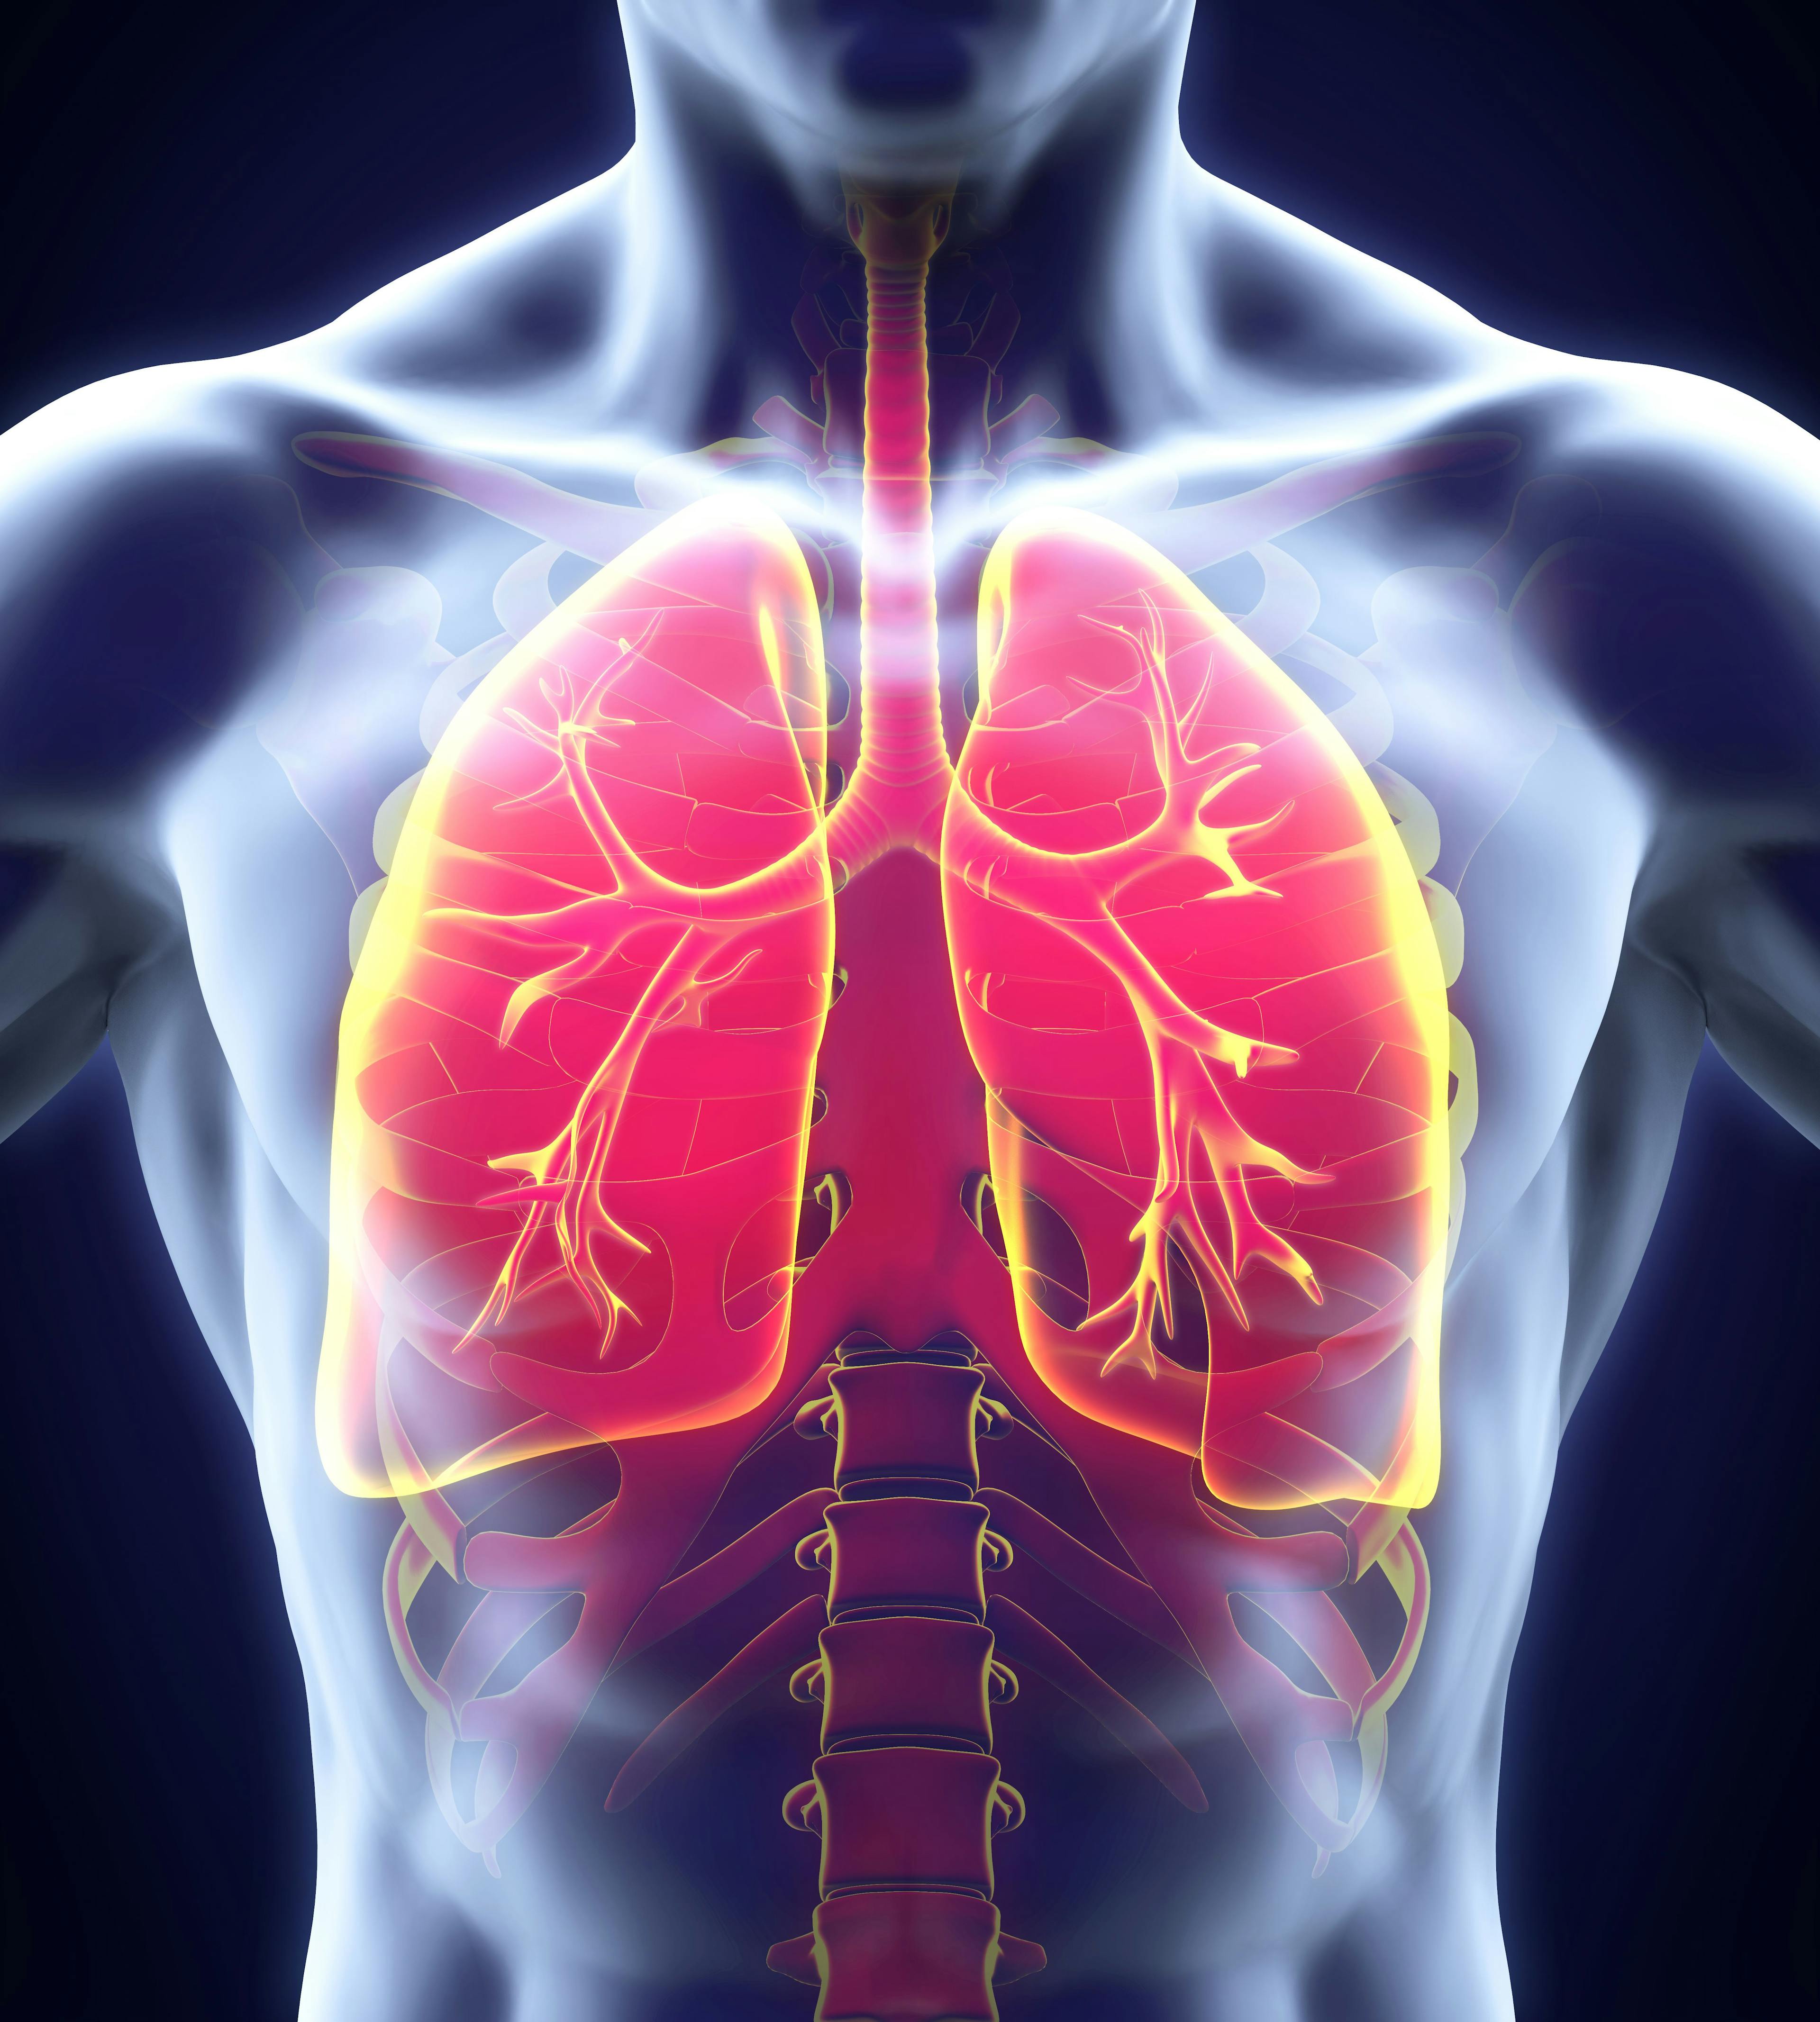 Research Into Plasma Proteins Yields Potential Biomarkers for Asthma Severity